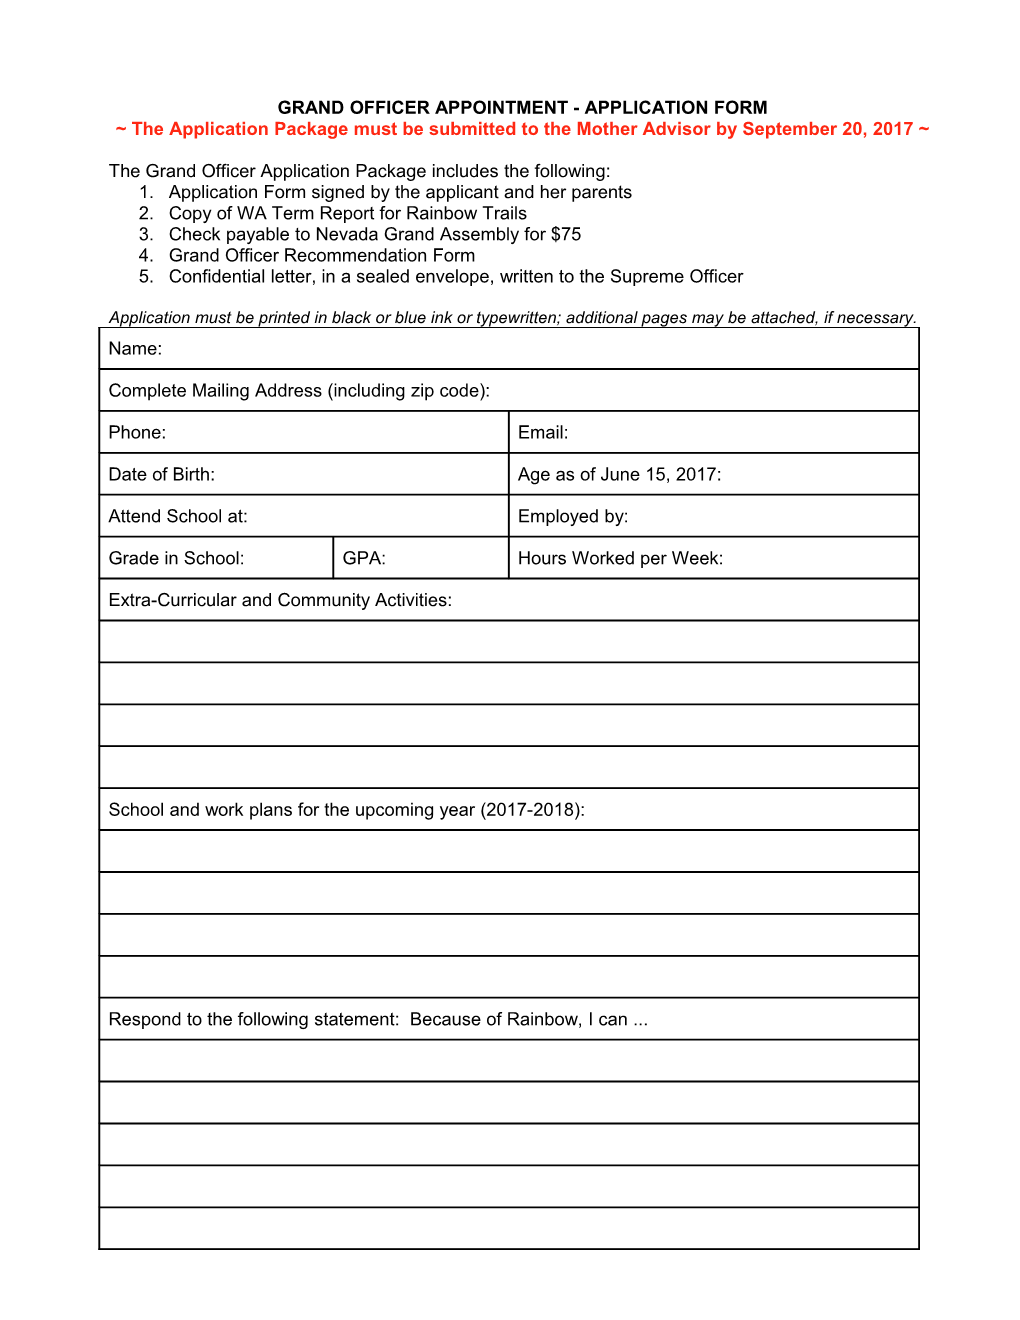 Grand Officer Appointment -Application Form